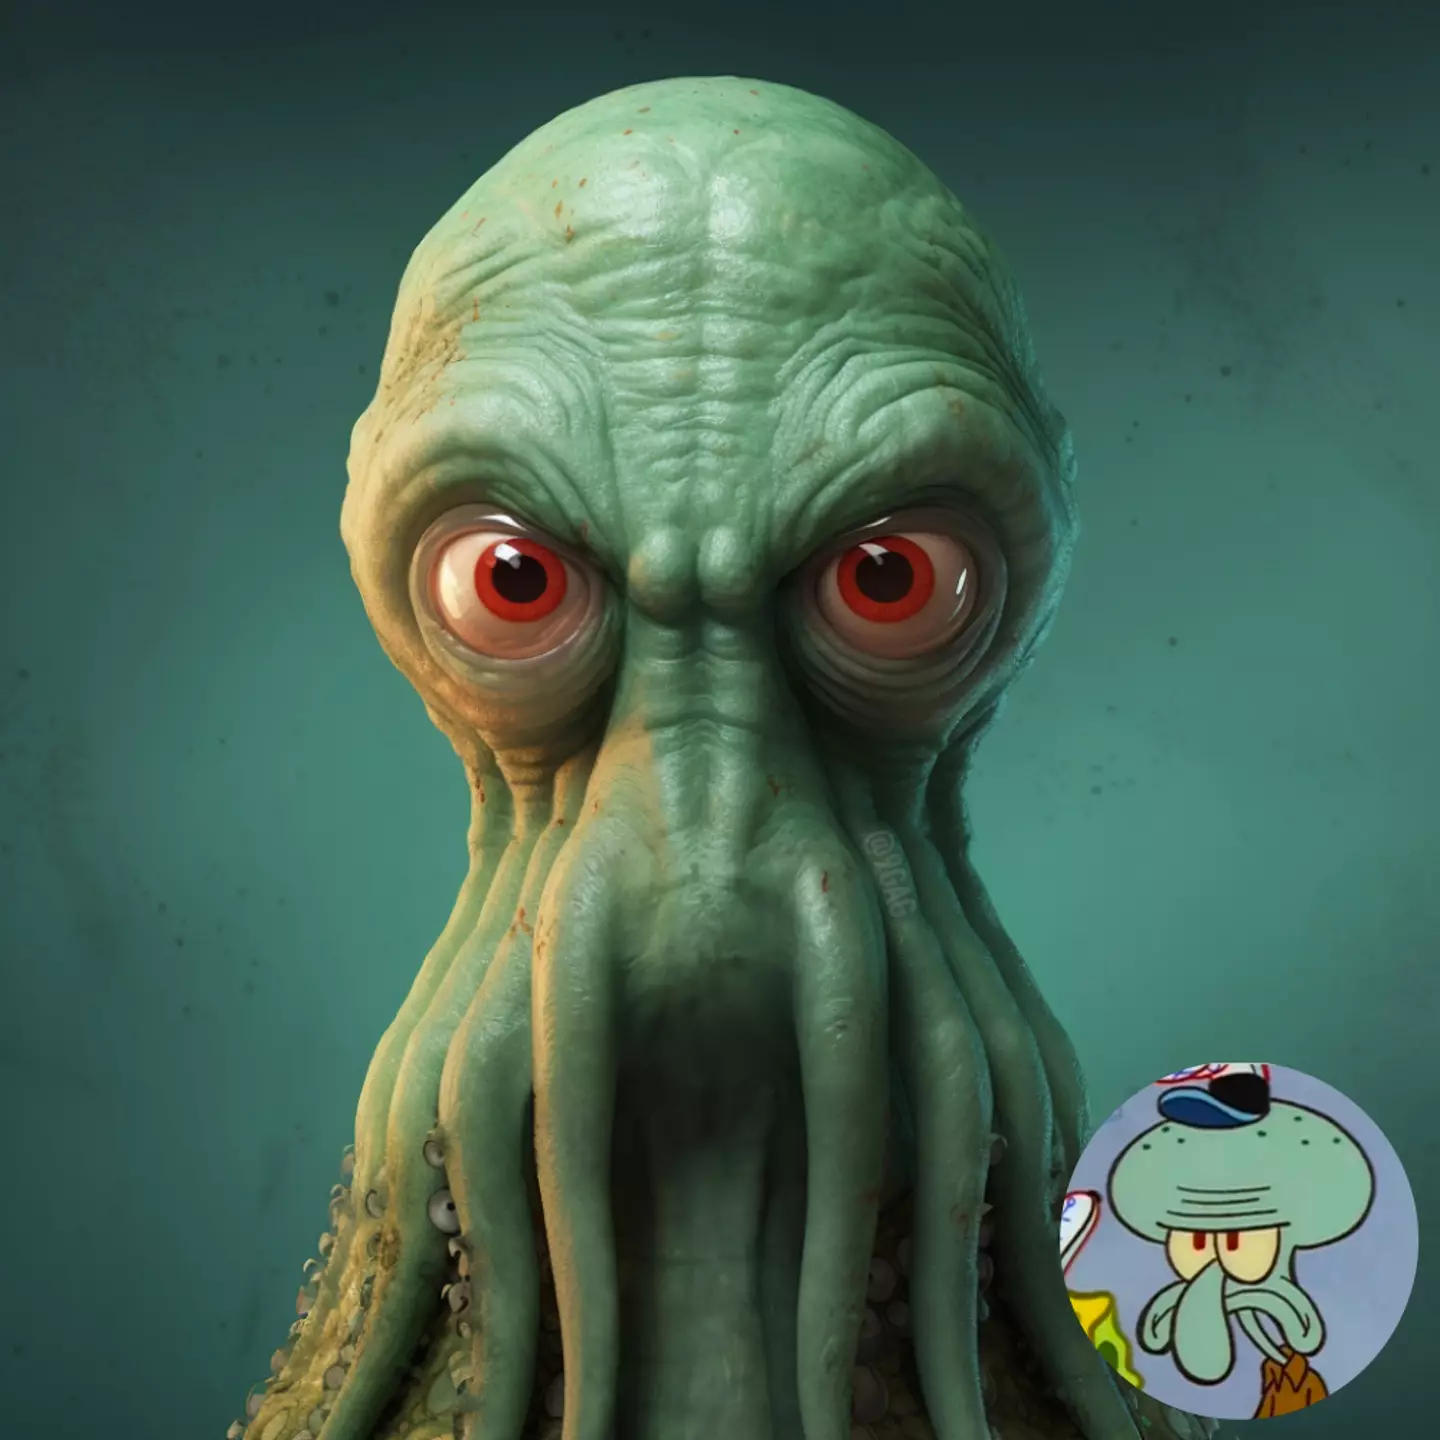 Hail Cthulhu, destroyer of worlds! Oh wait, it's just Squidward.